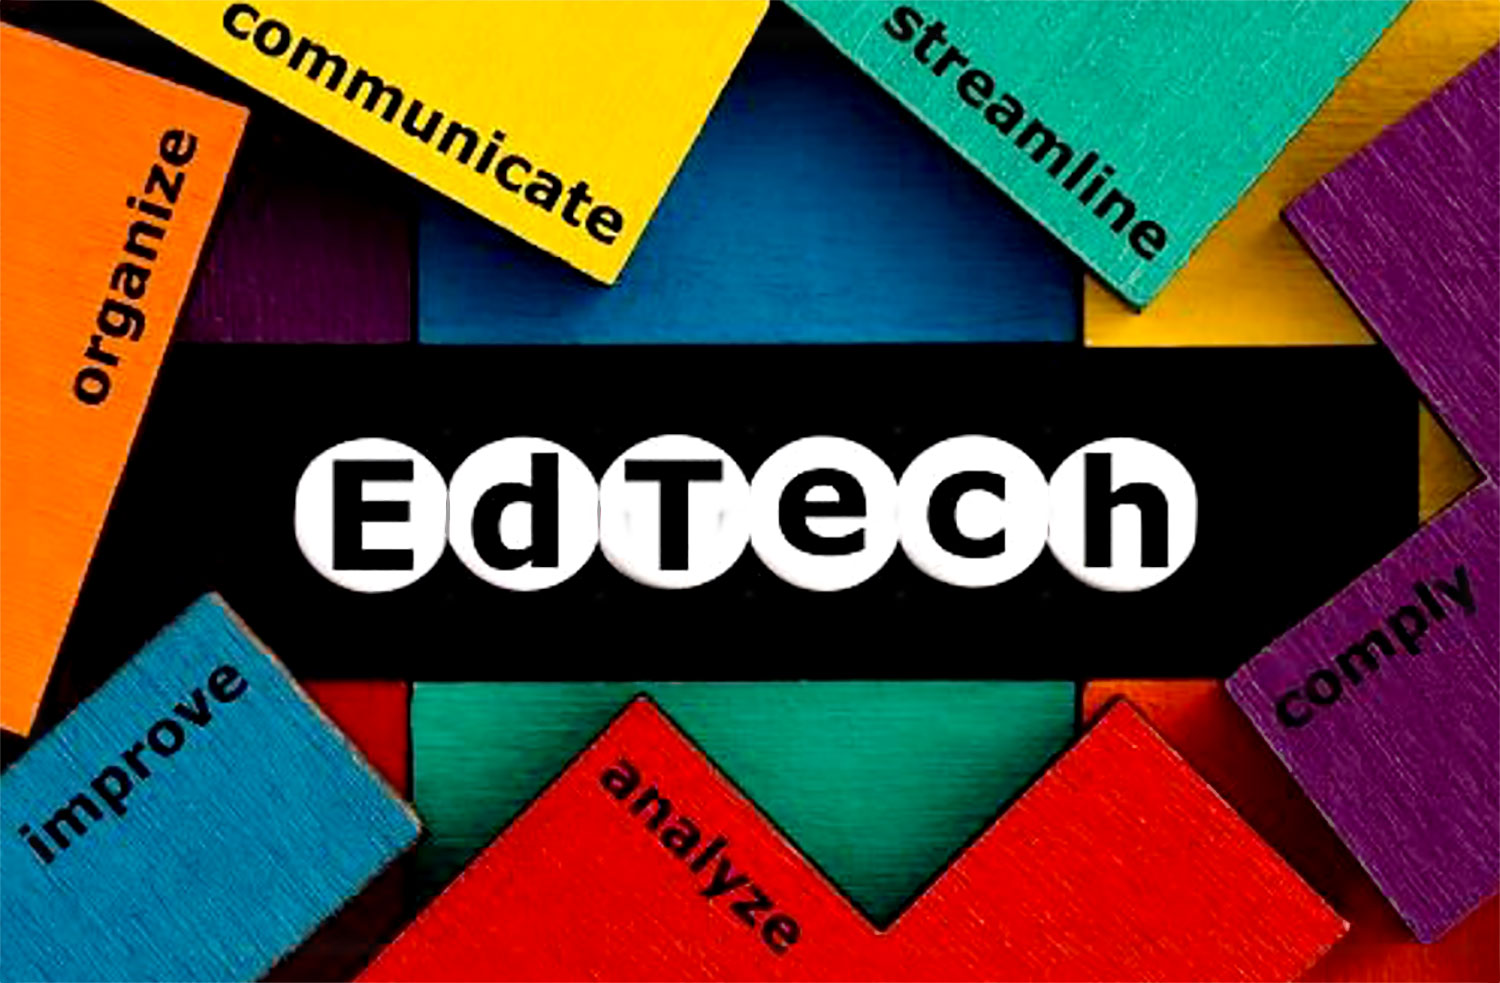 EdTech with colored boxes